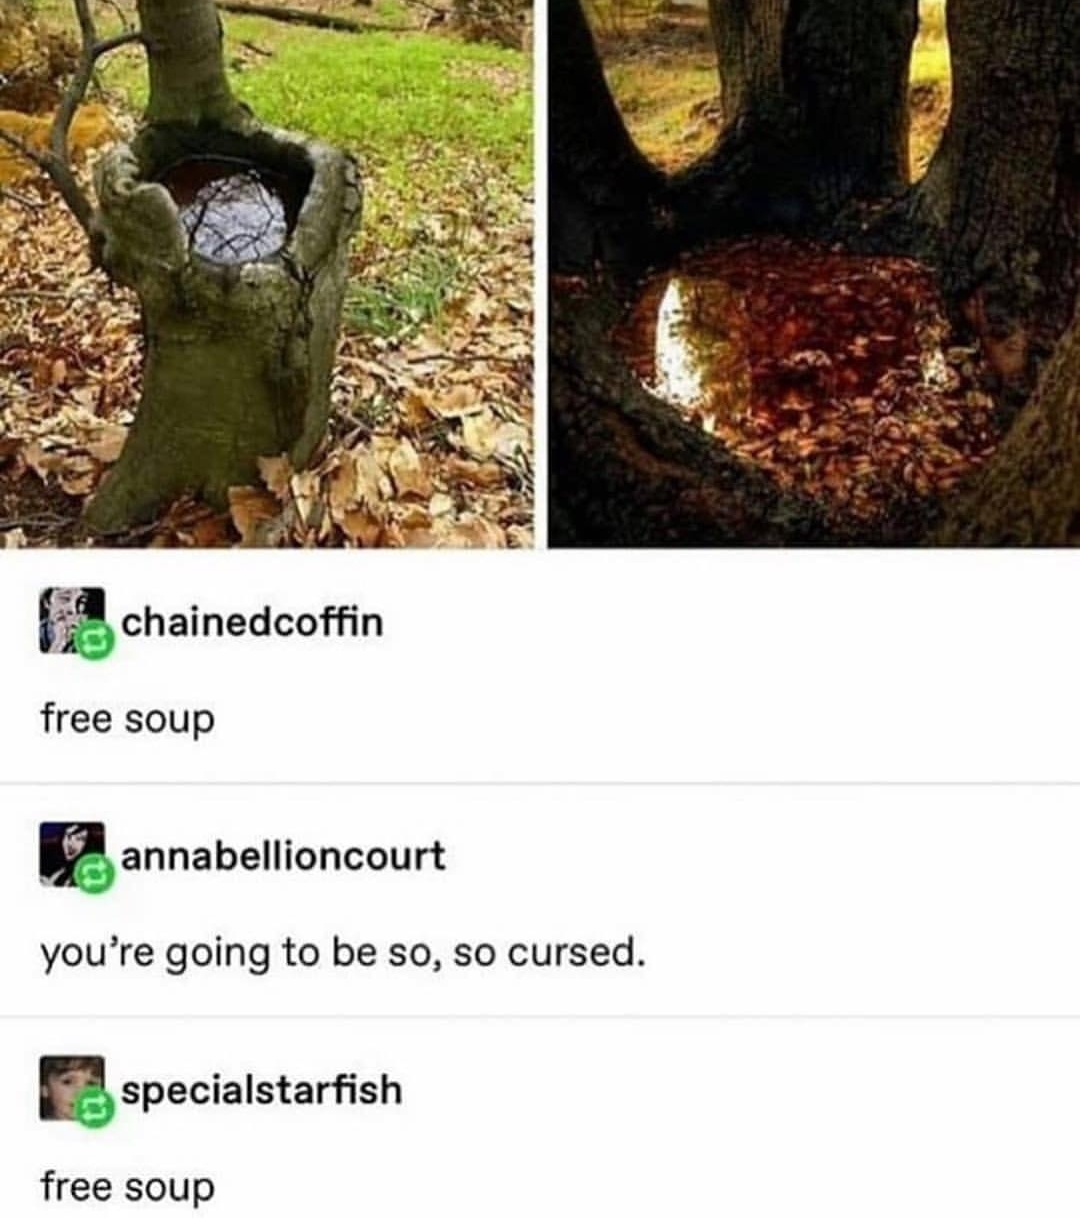 chainedcoffin free soup annabellioncourt you're going to be so, so cursed. E specialstarfish free soup